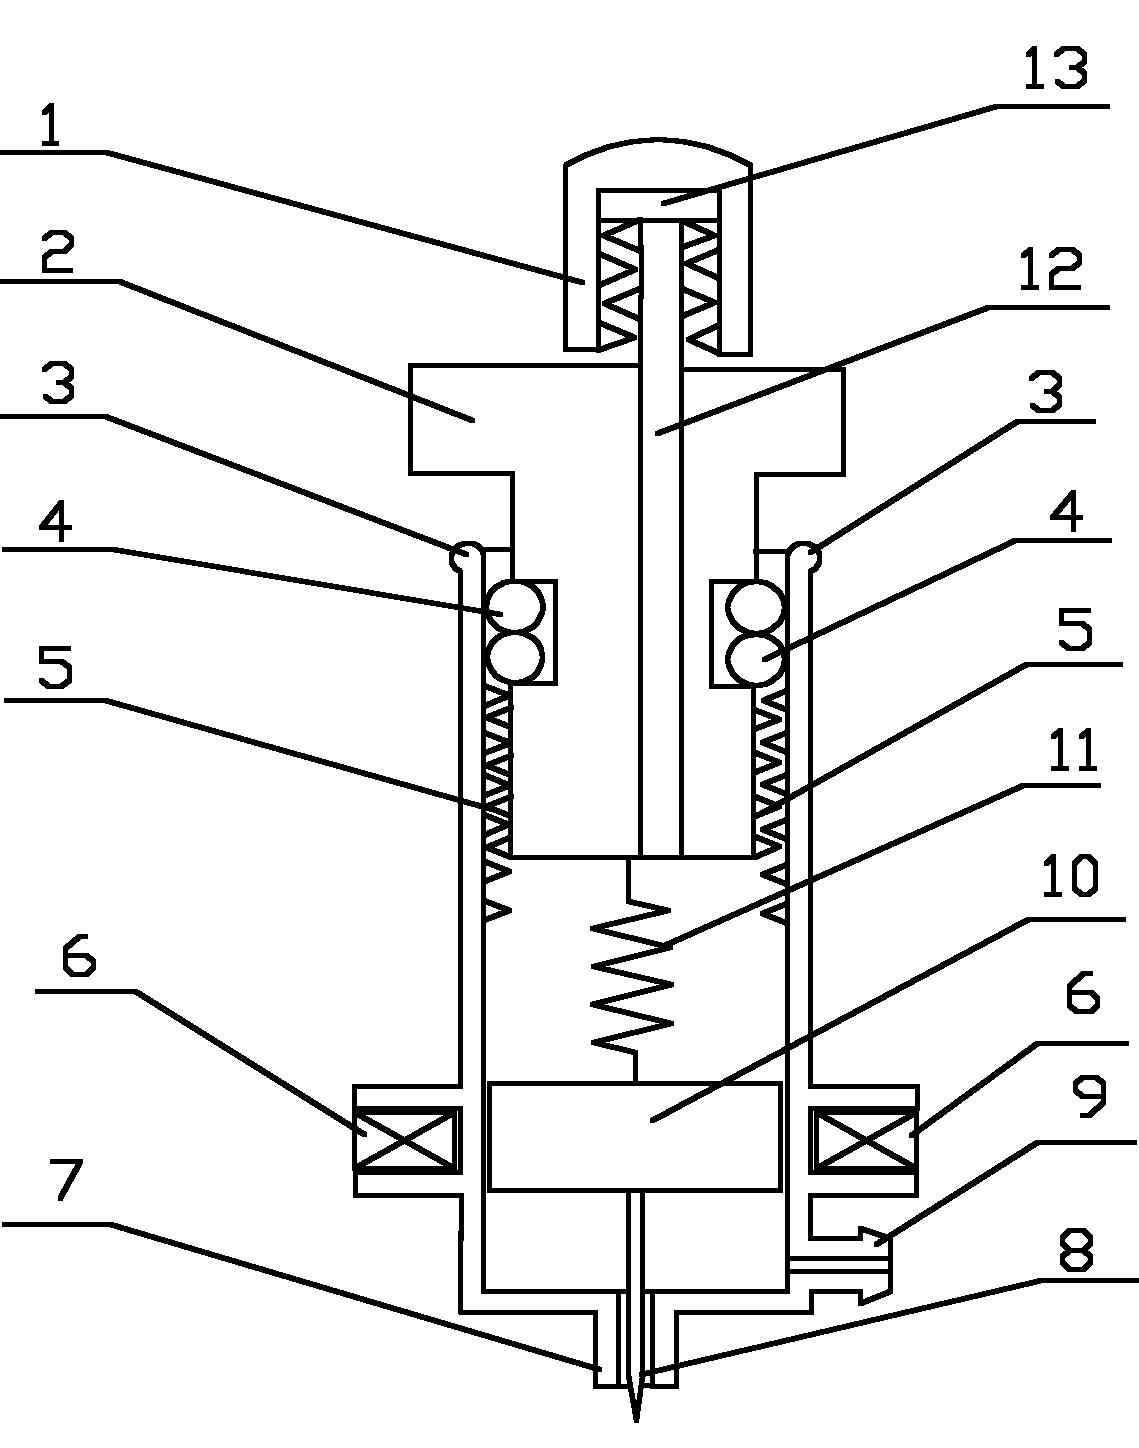 Electrospinning direct-writing nozzle capable of controlling starting and stopping